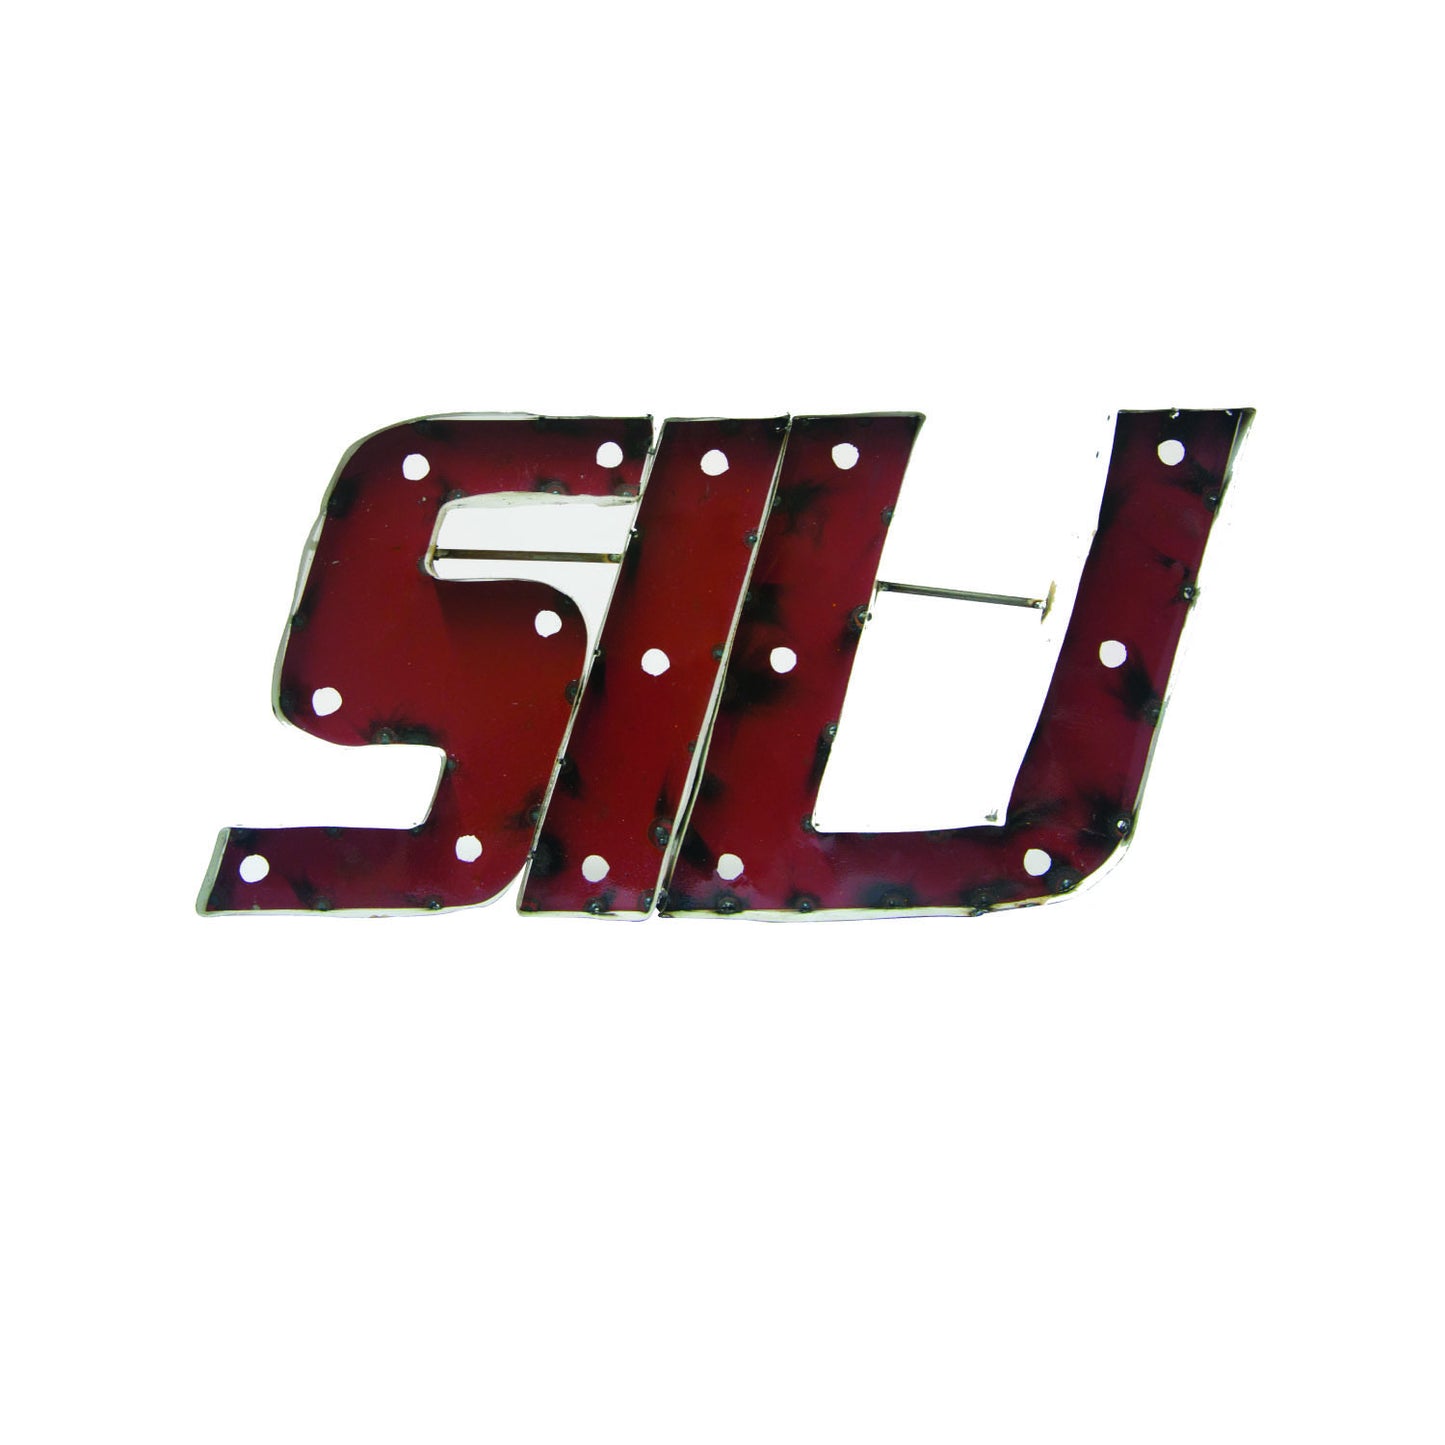 Southern Illinois University "SIU" Lighted Recycled Metal Wall Decor